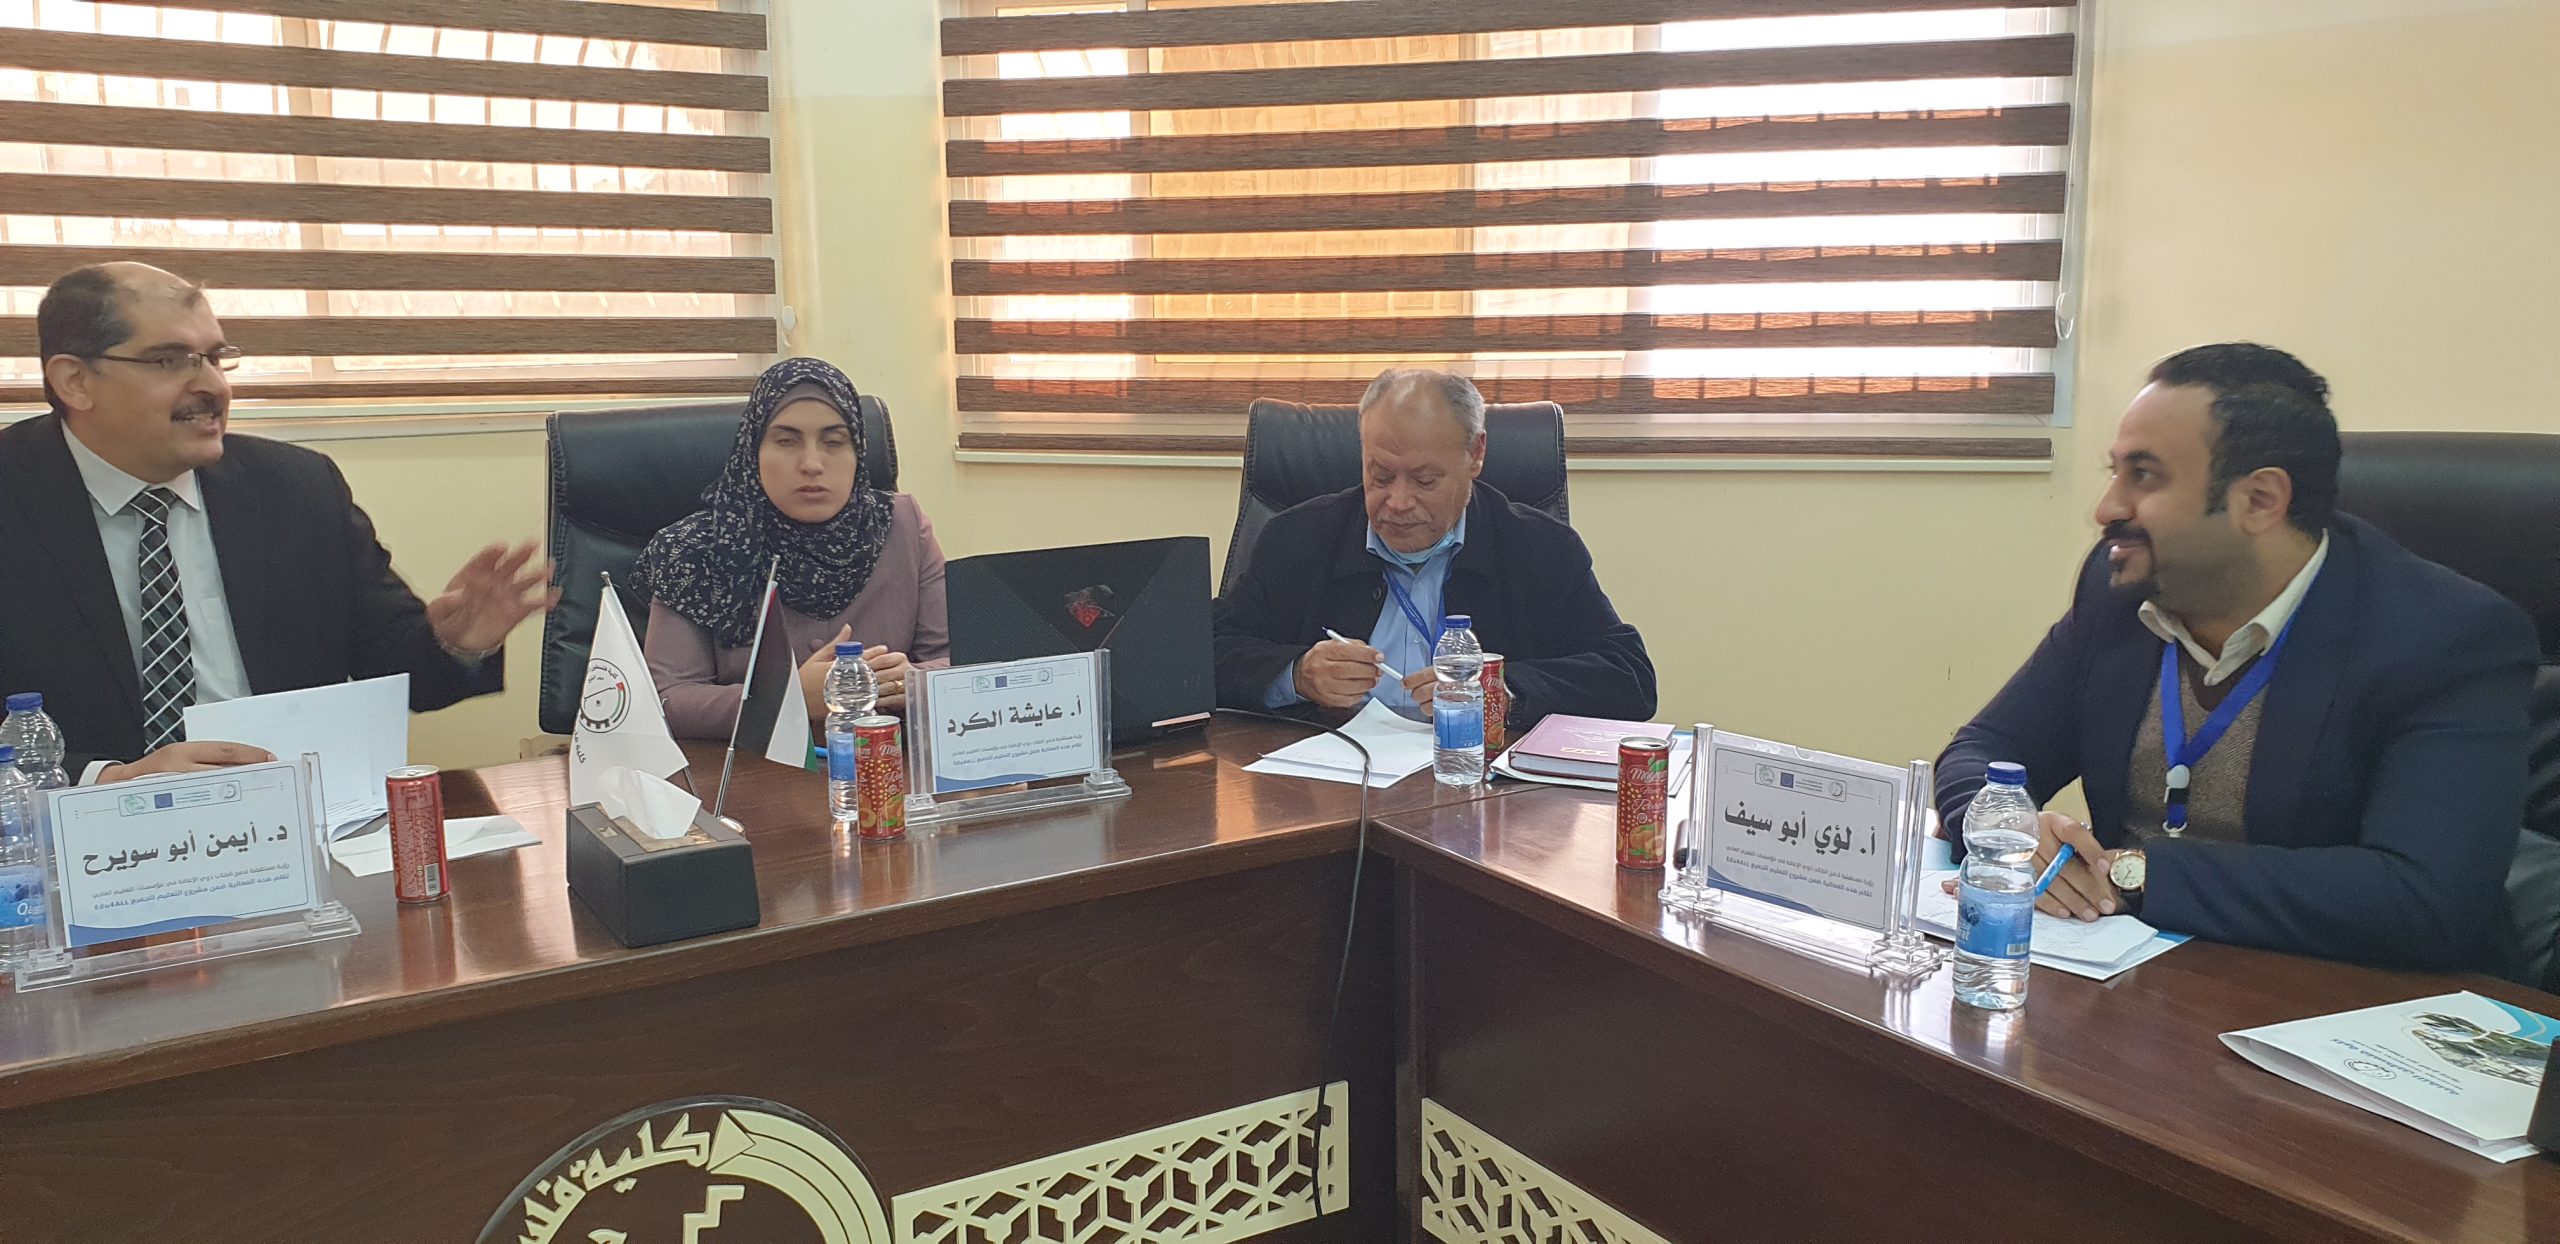 Dr. Mohamed Elnaggar and Aisha Ahmad El-Kurd discussion with other teachers